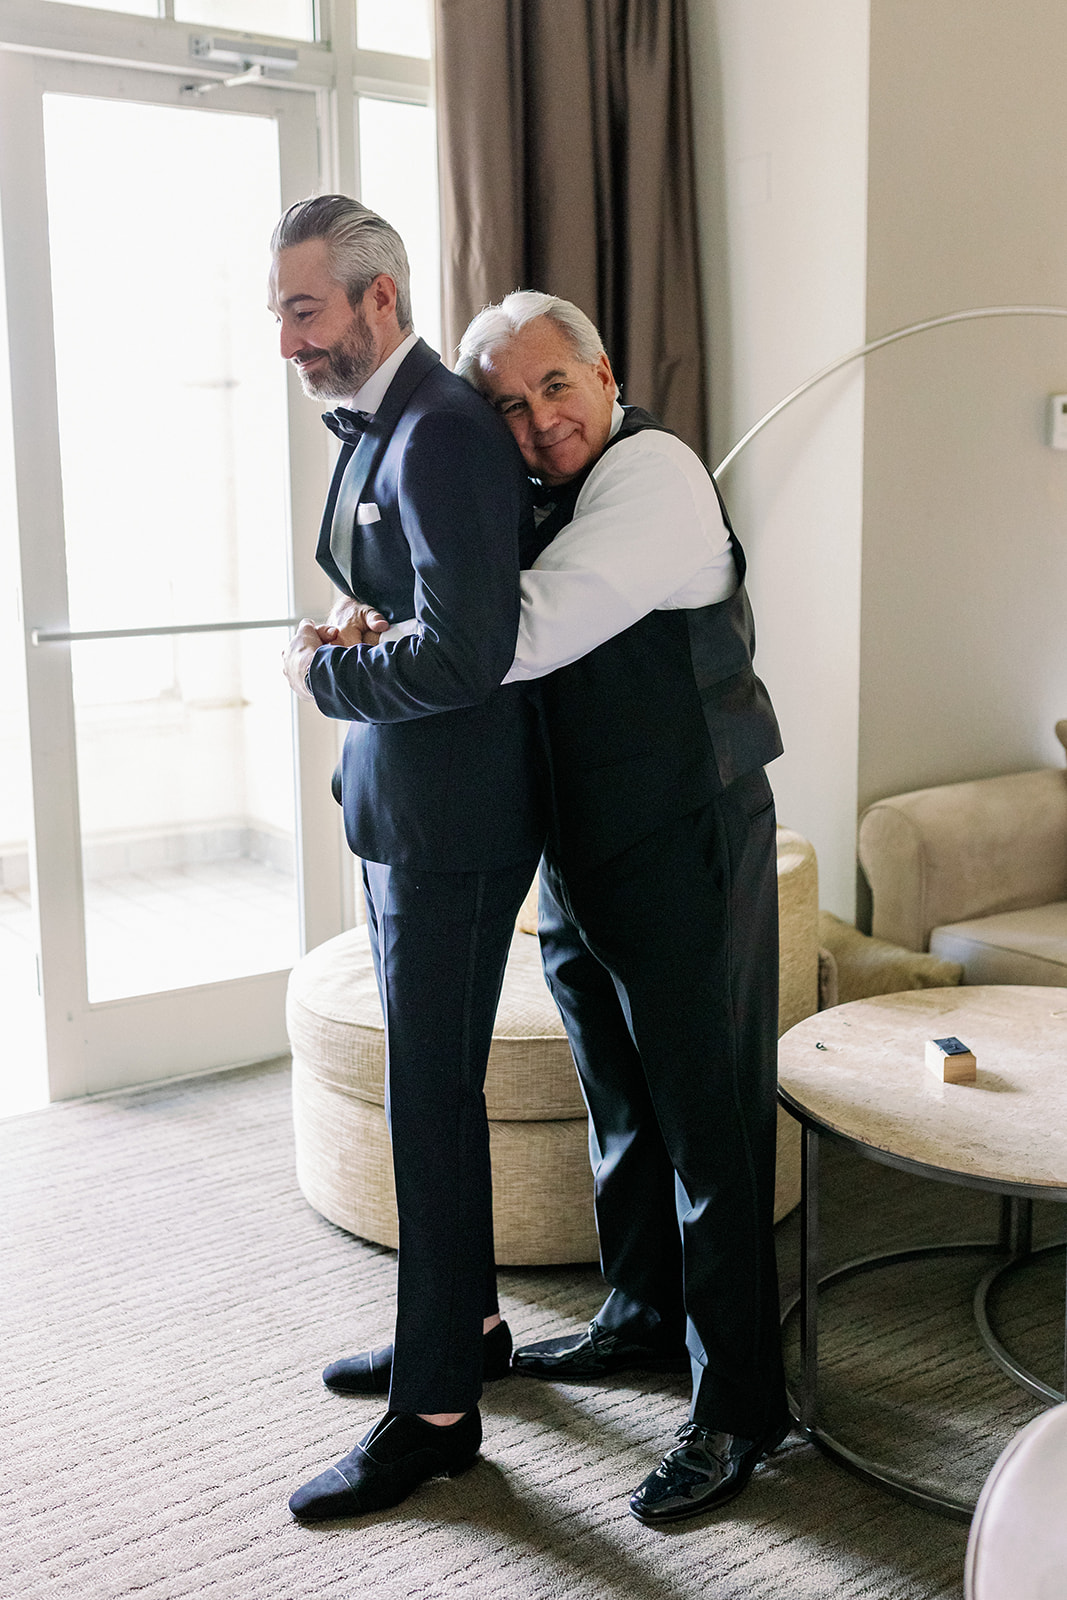 Groom's dad hugging him from behind while getting ready.